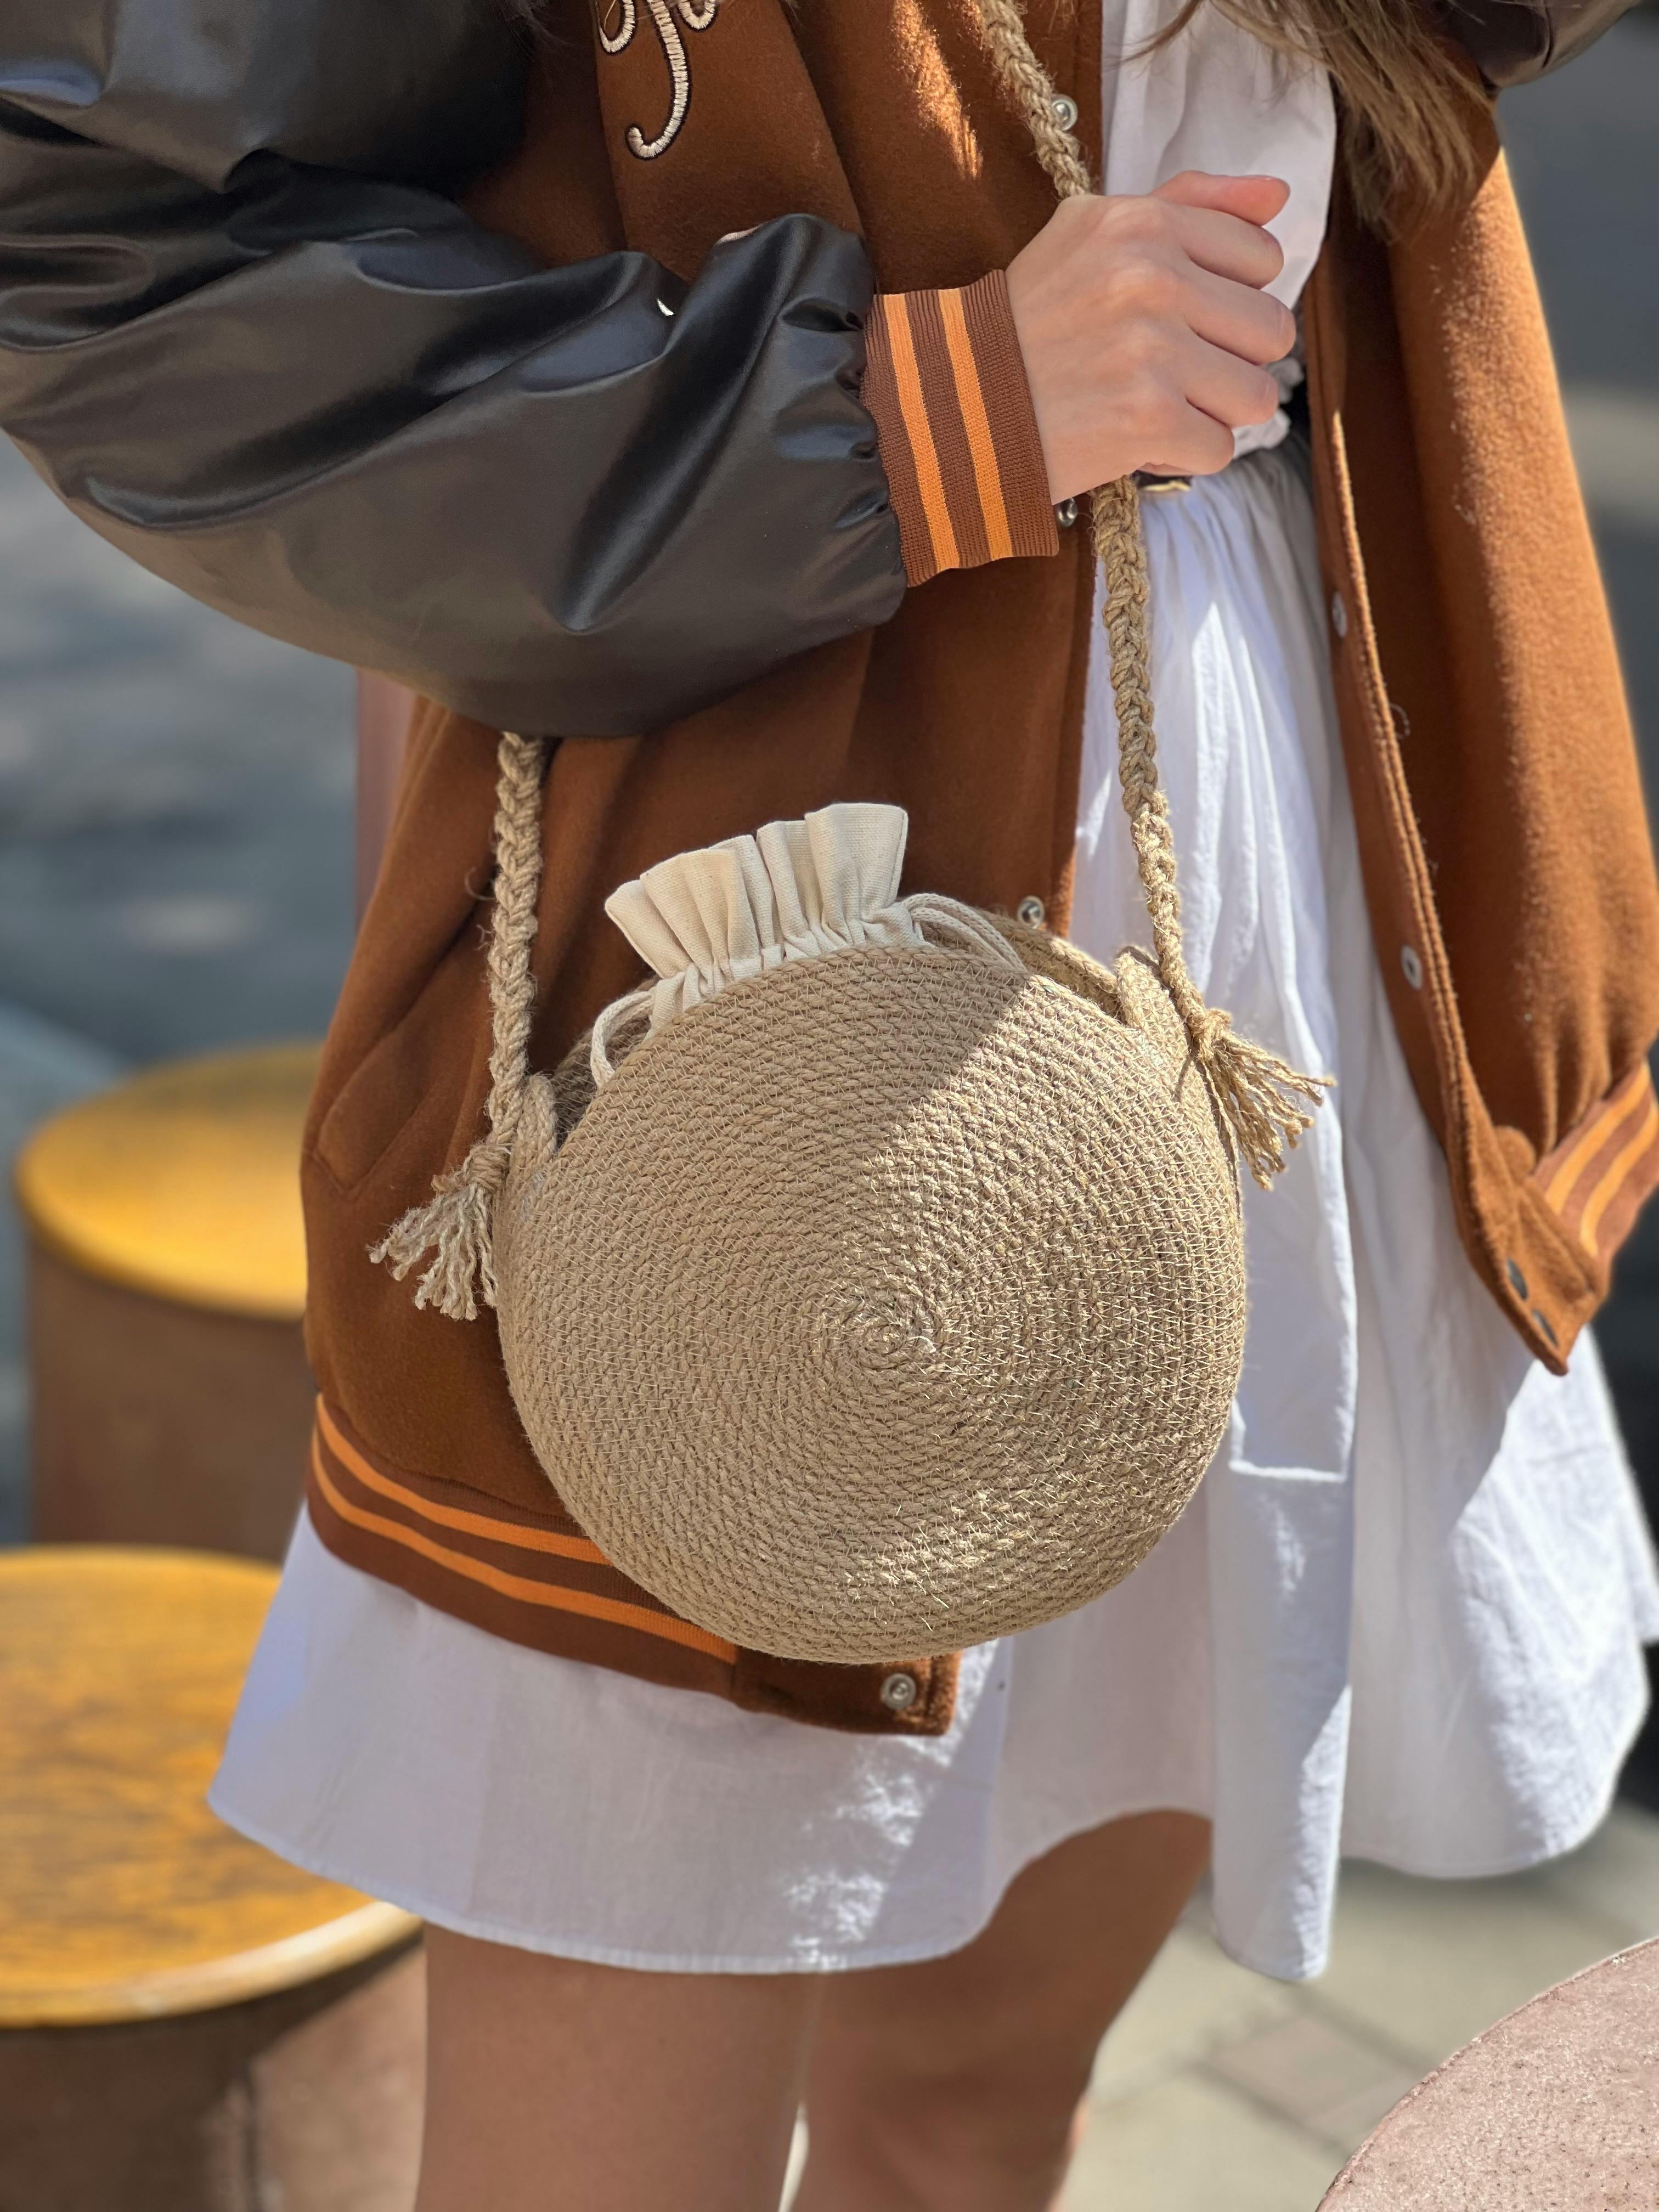 Round Rattan Bag - Black and White – Gypsy Life Surf Shop